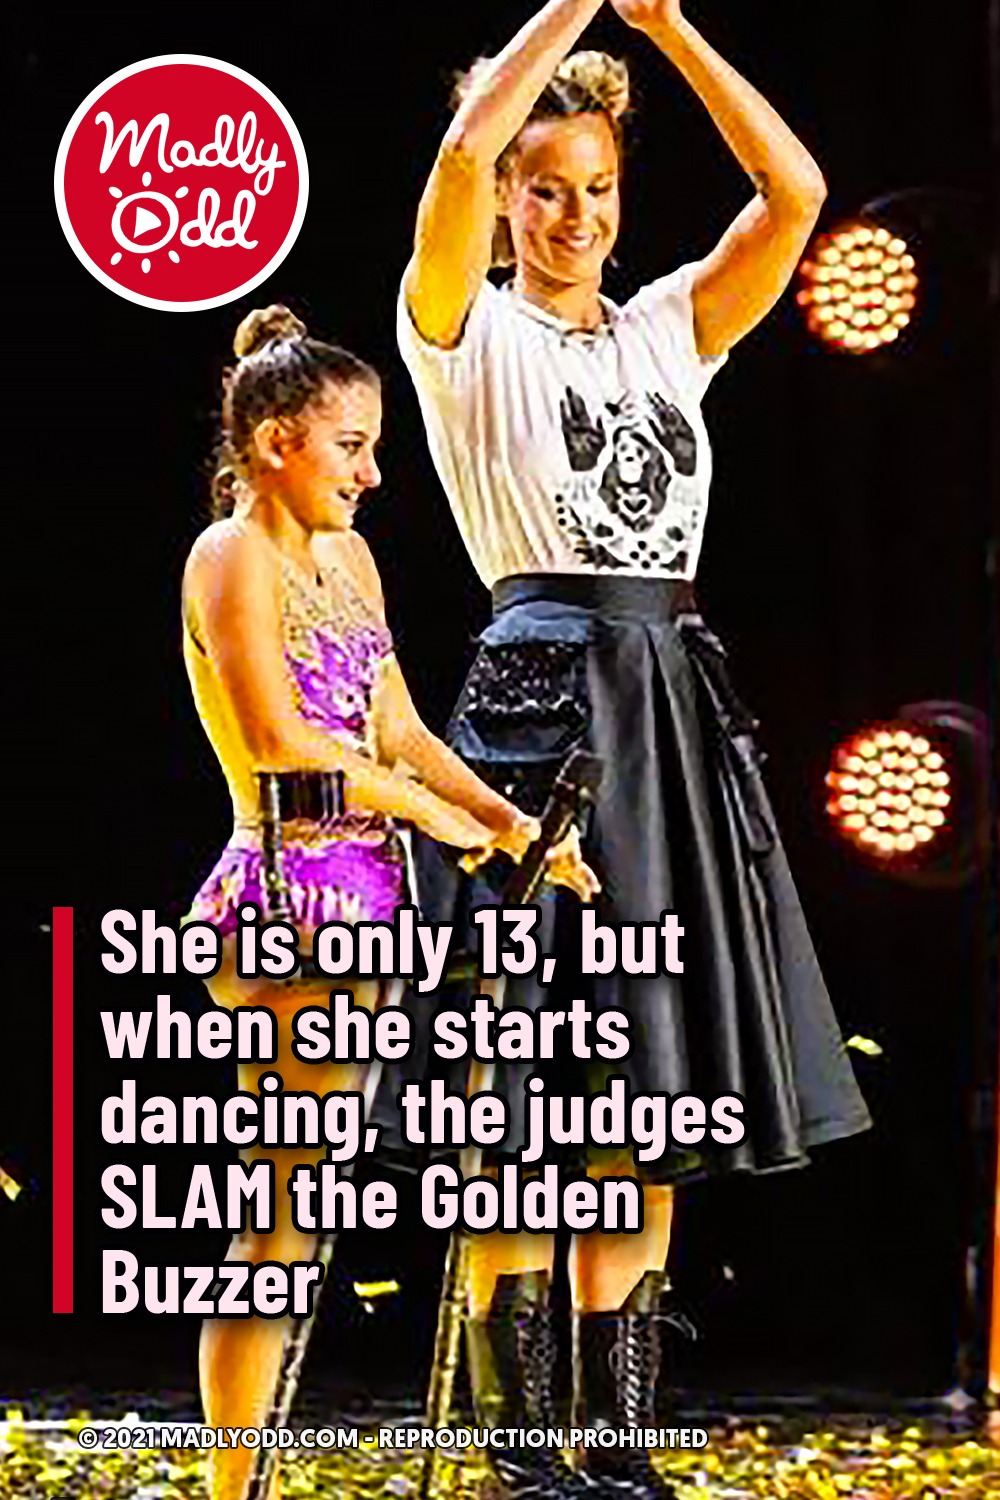 She is only 13, but when she starts dancing, the judges SLAM the Golden Buzzer